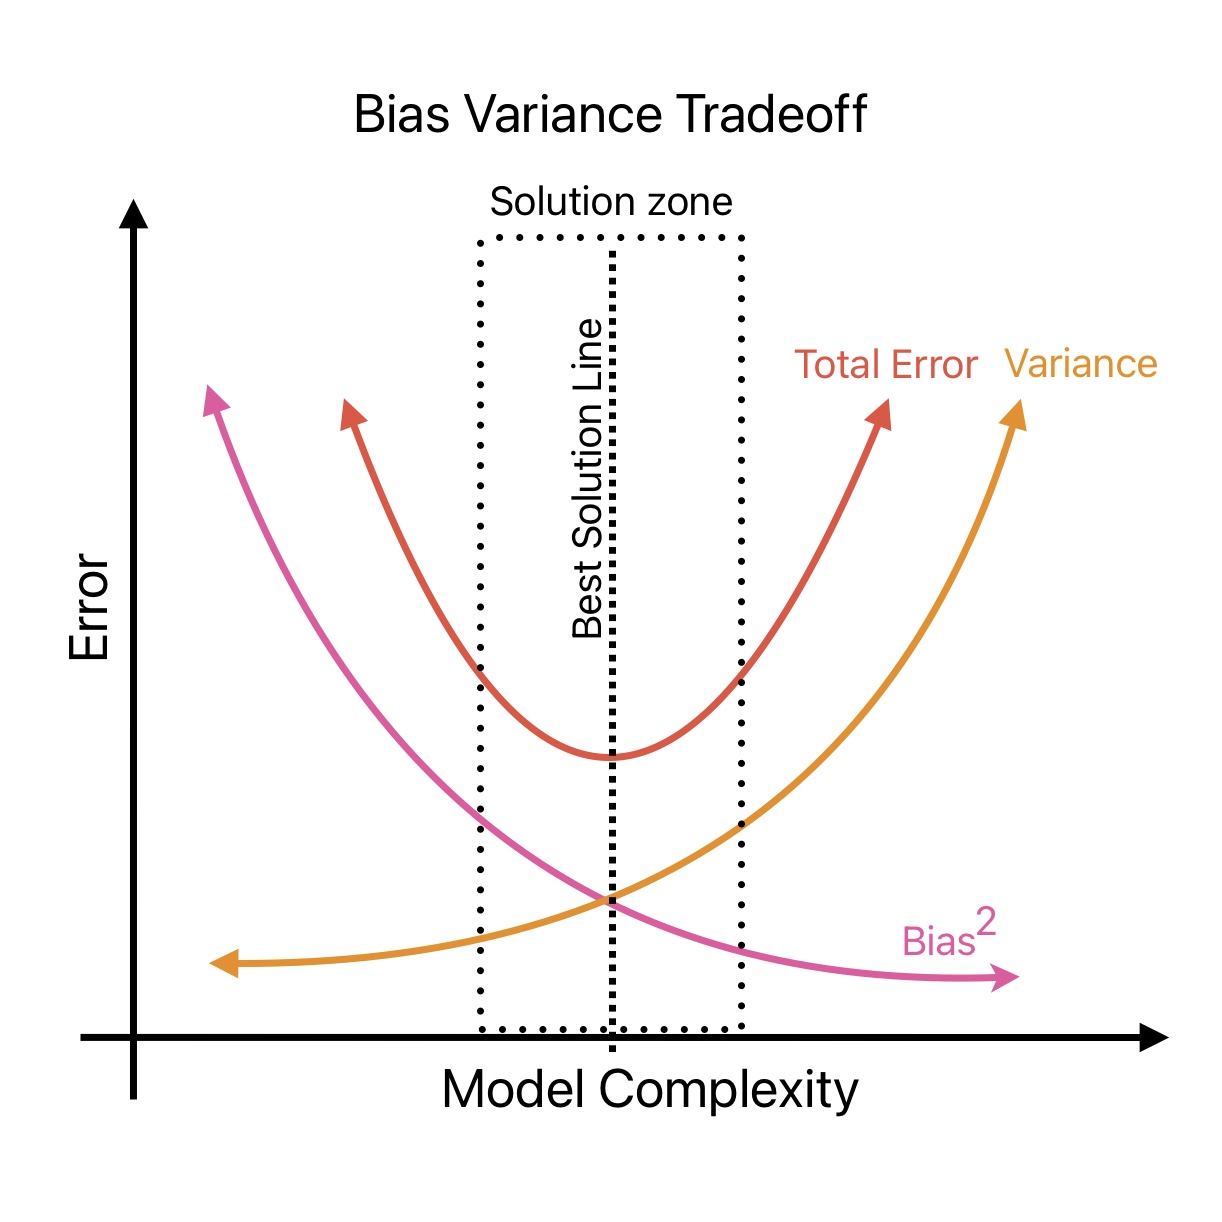 this image shows Bias Variance Tradeoff in machine learning